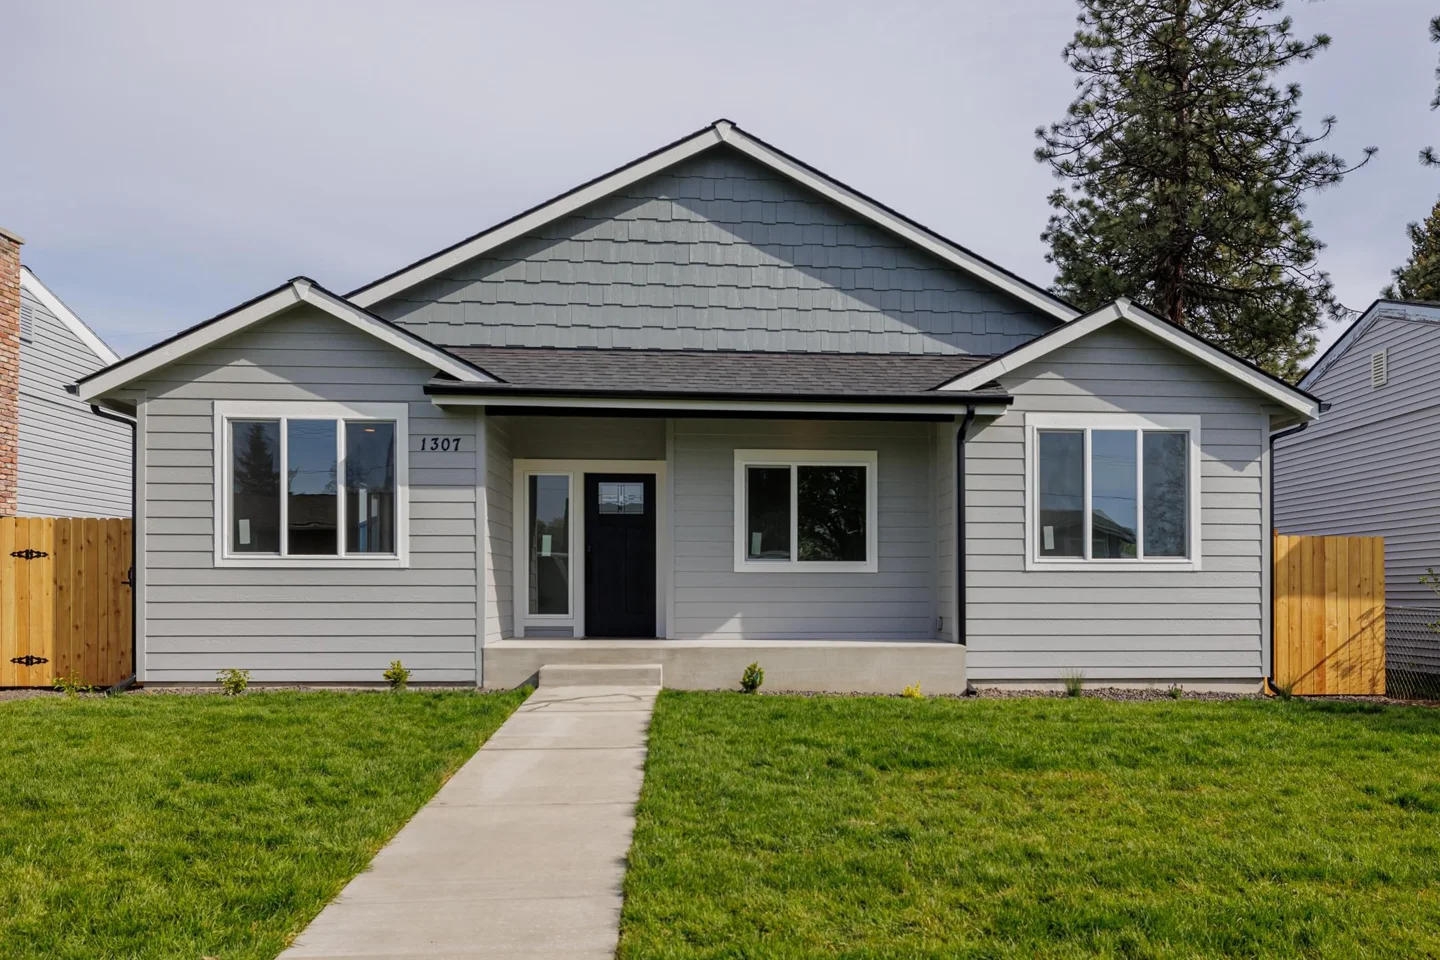 Newly Constructed Spokane Home with Covered Patio